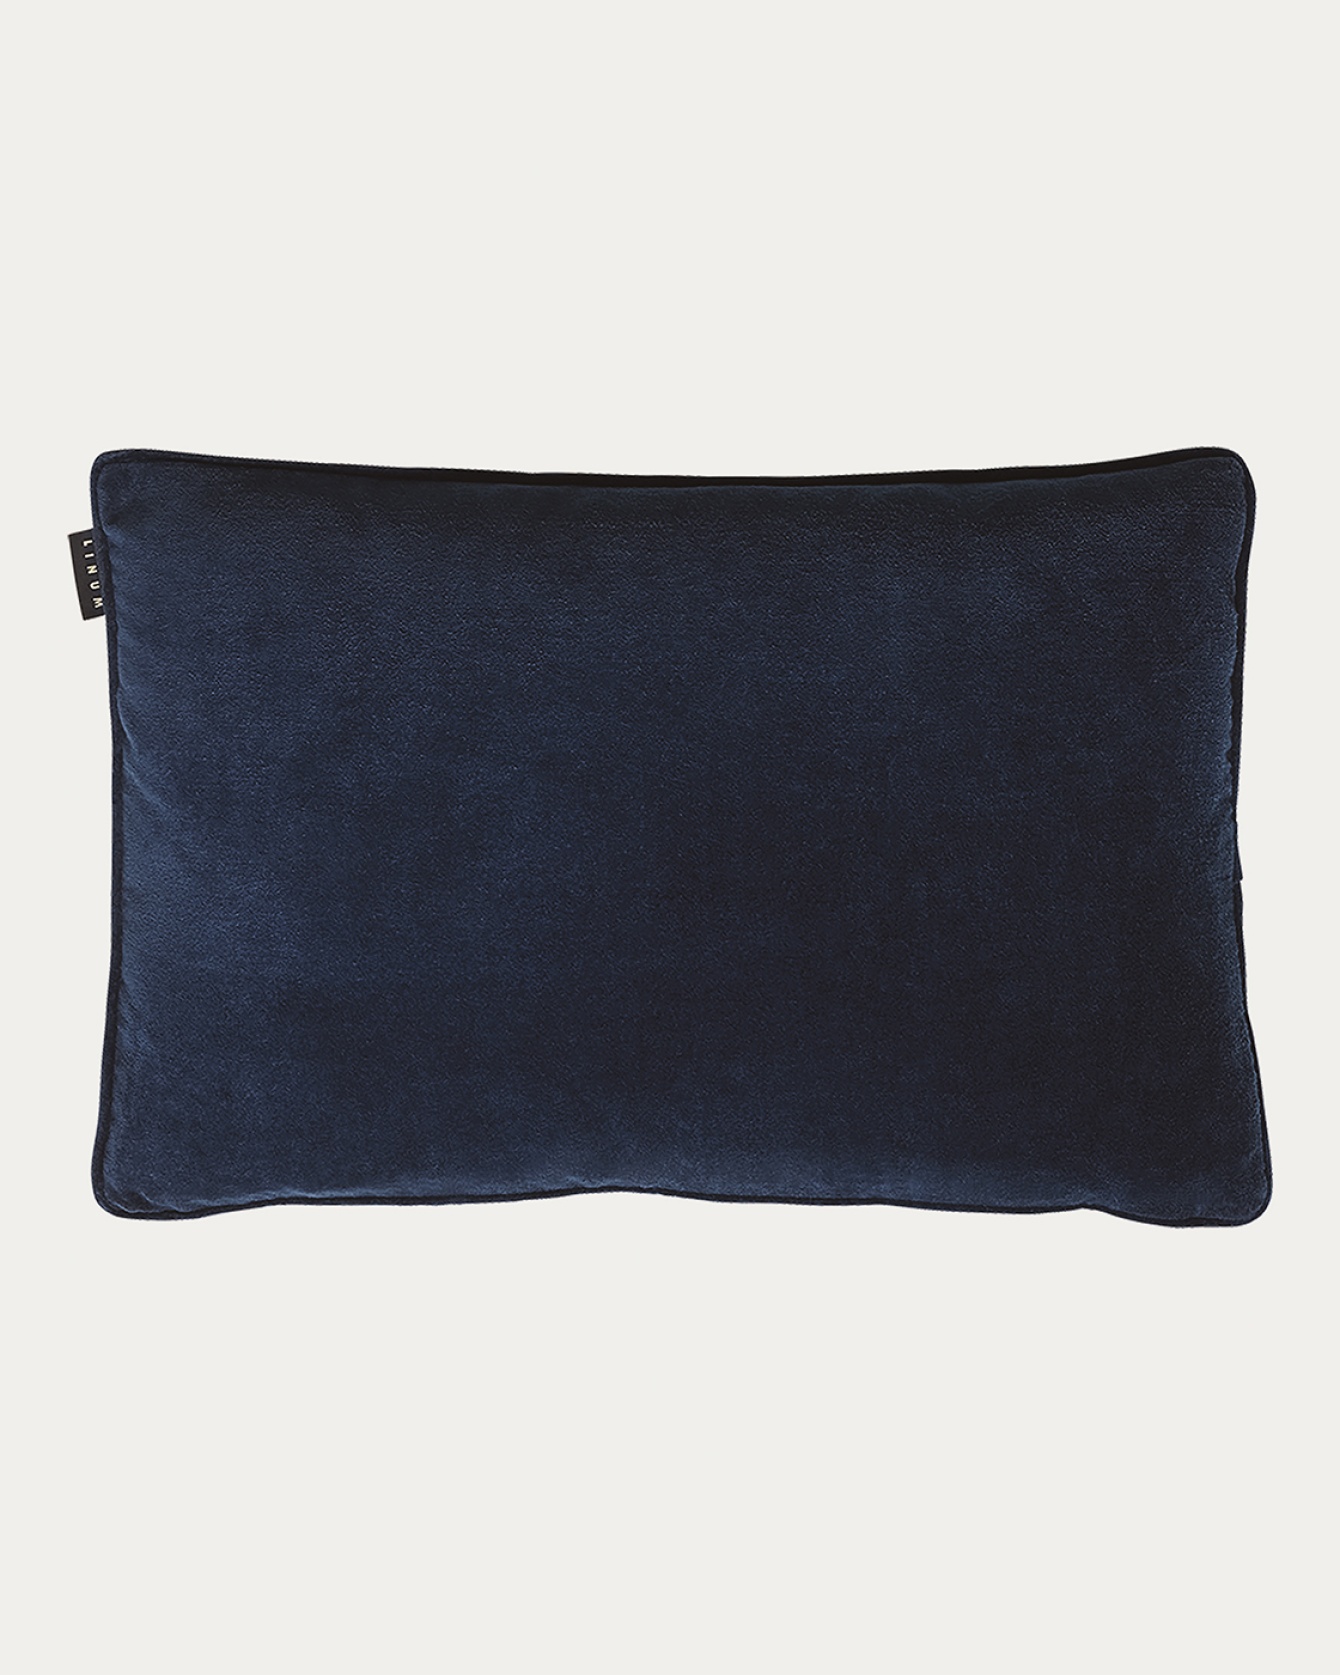 Product image ink blue PAOLO cushion cover in soft cotton velvet from LINUM DESIGN. Size 40x60 cm.